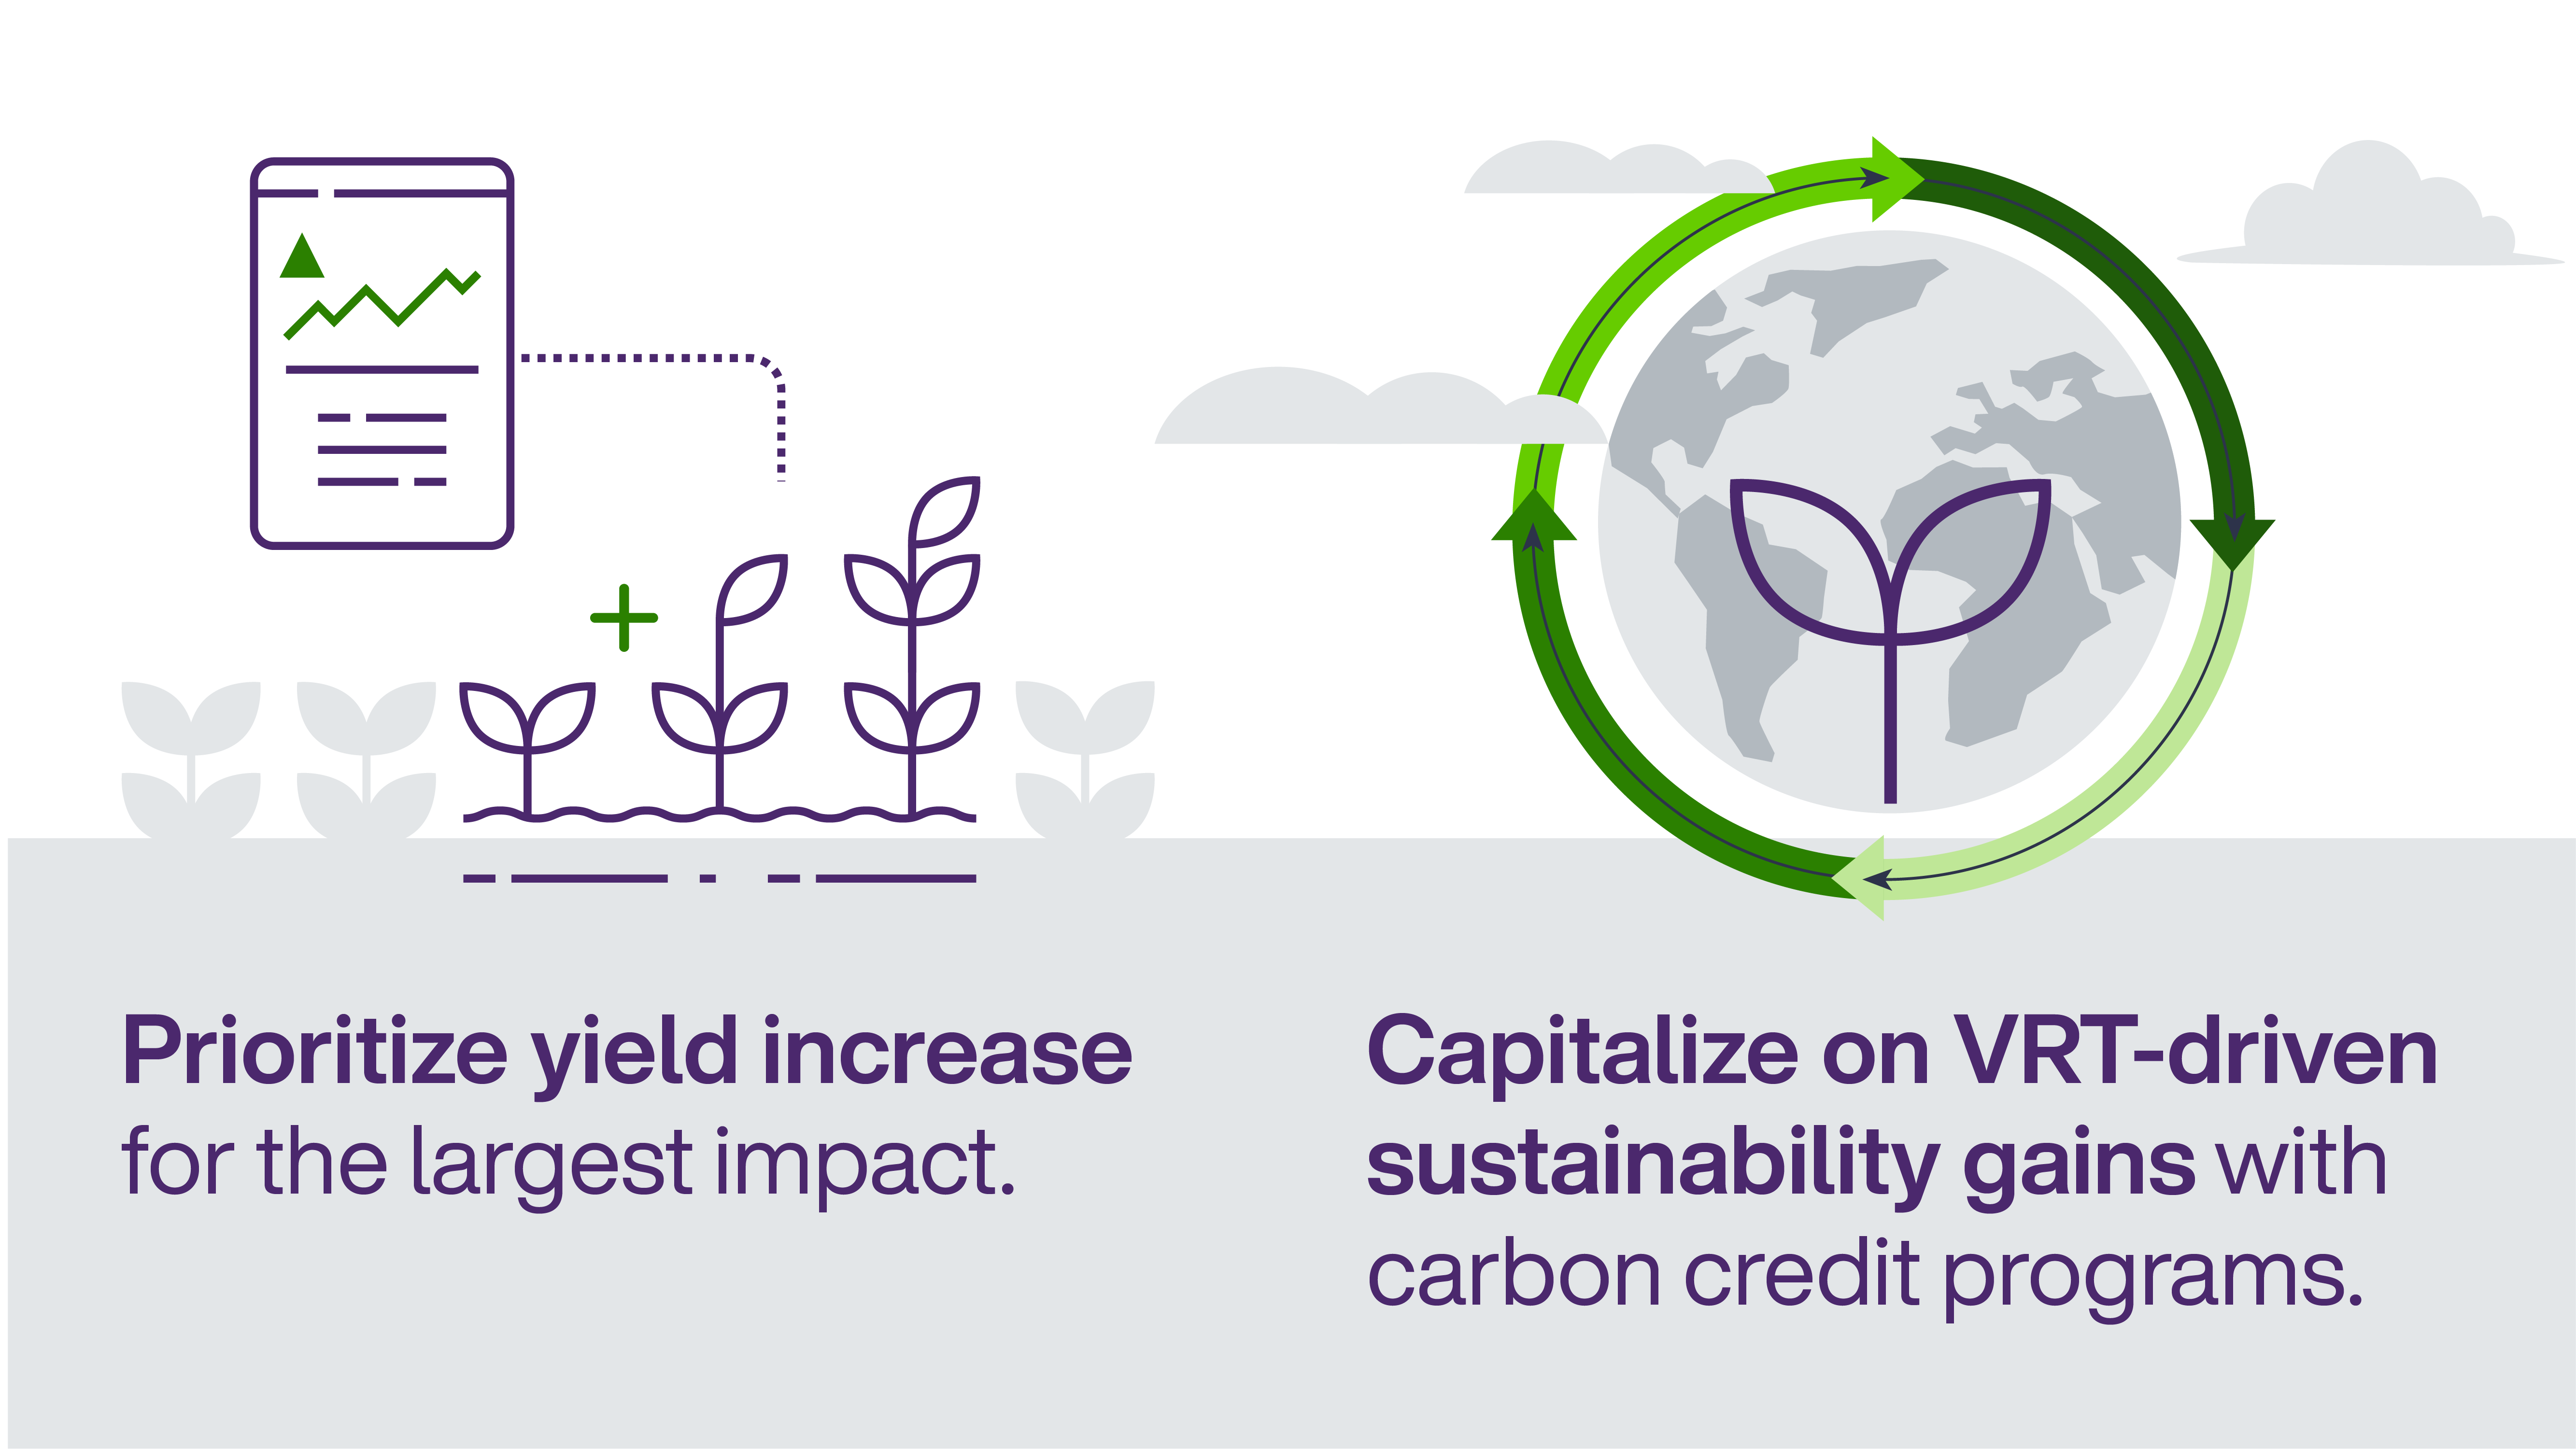 VRT fertilizer research conducted: Prioritize yield increase for the largest impact and capitalize on VRT-driven sustainability gains with carbon credit programs